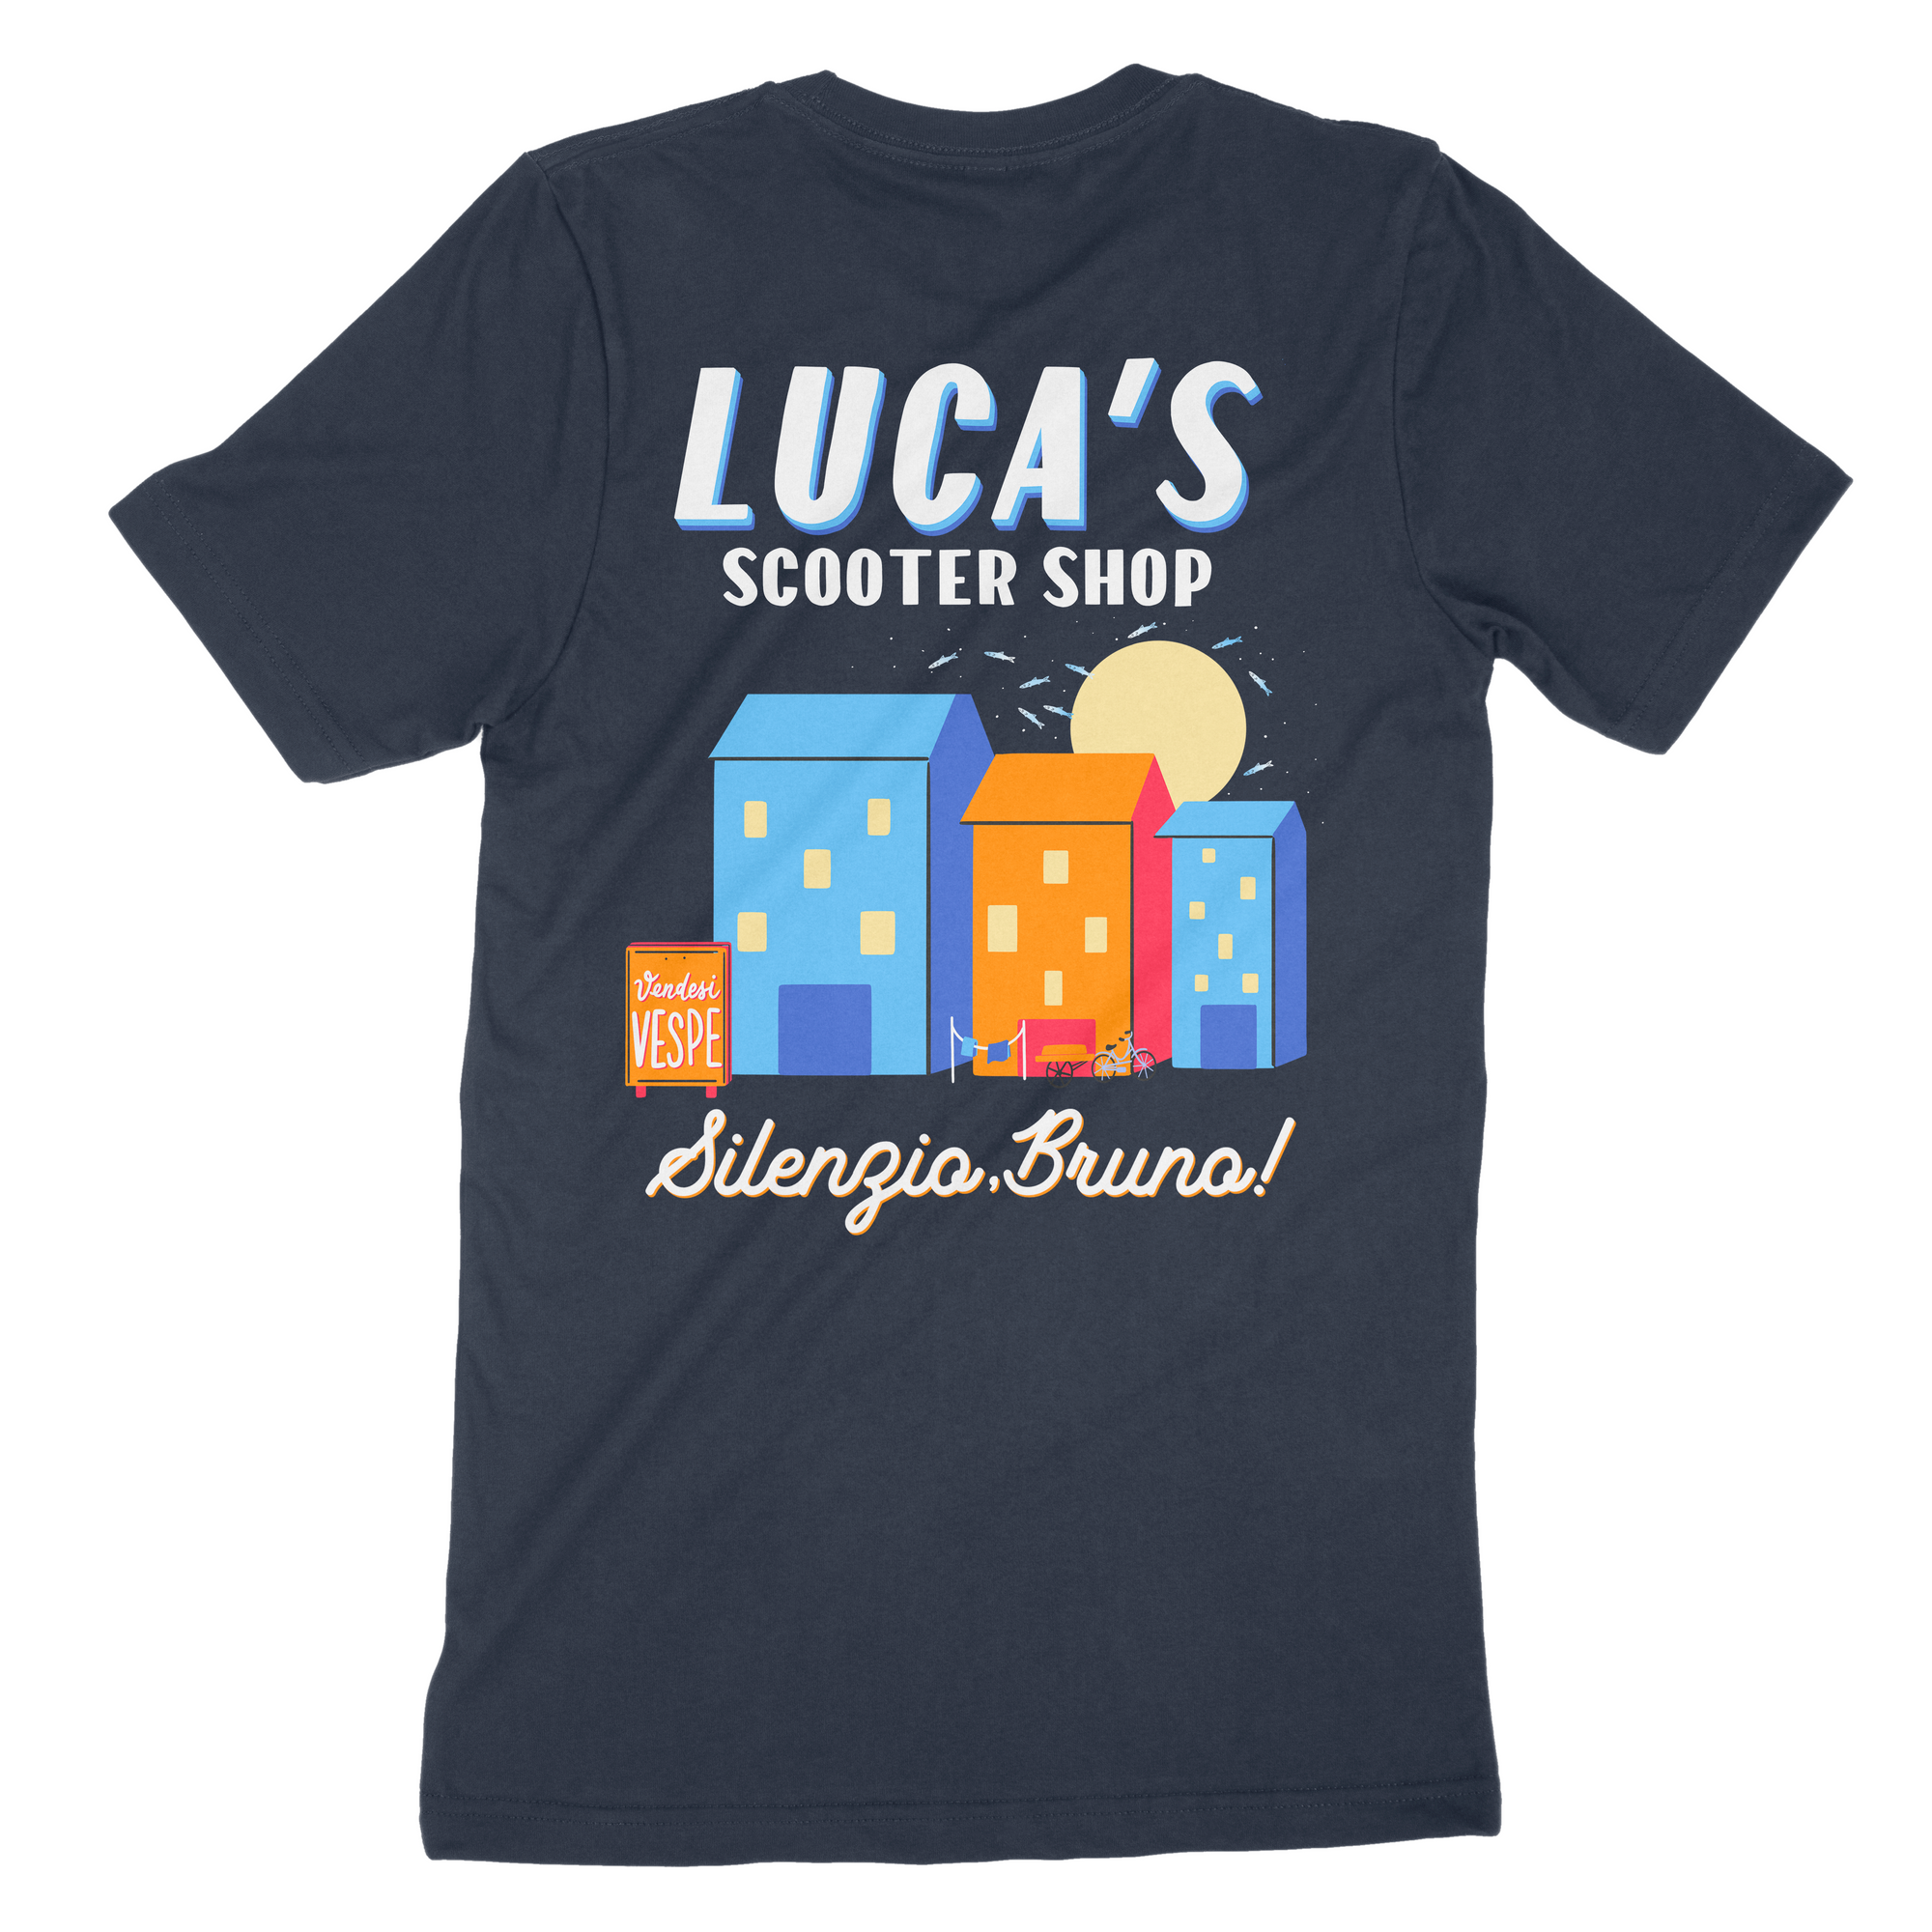 Luca's Scooter Shop Tee The Lost Bros